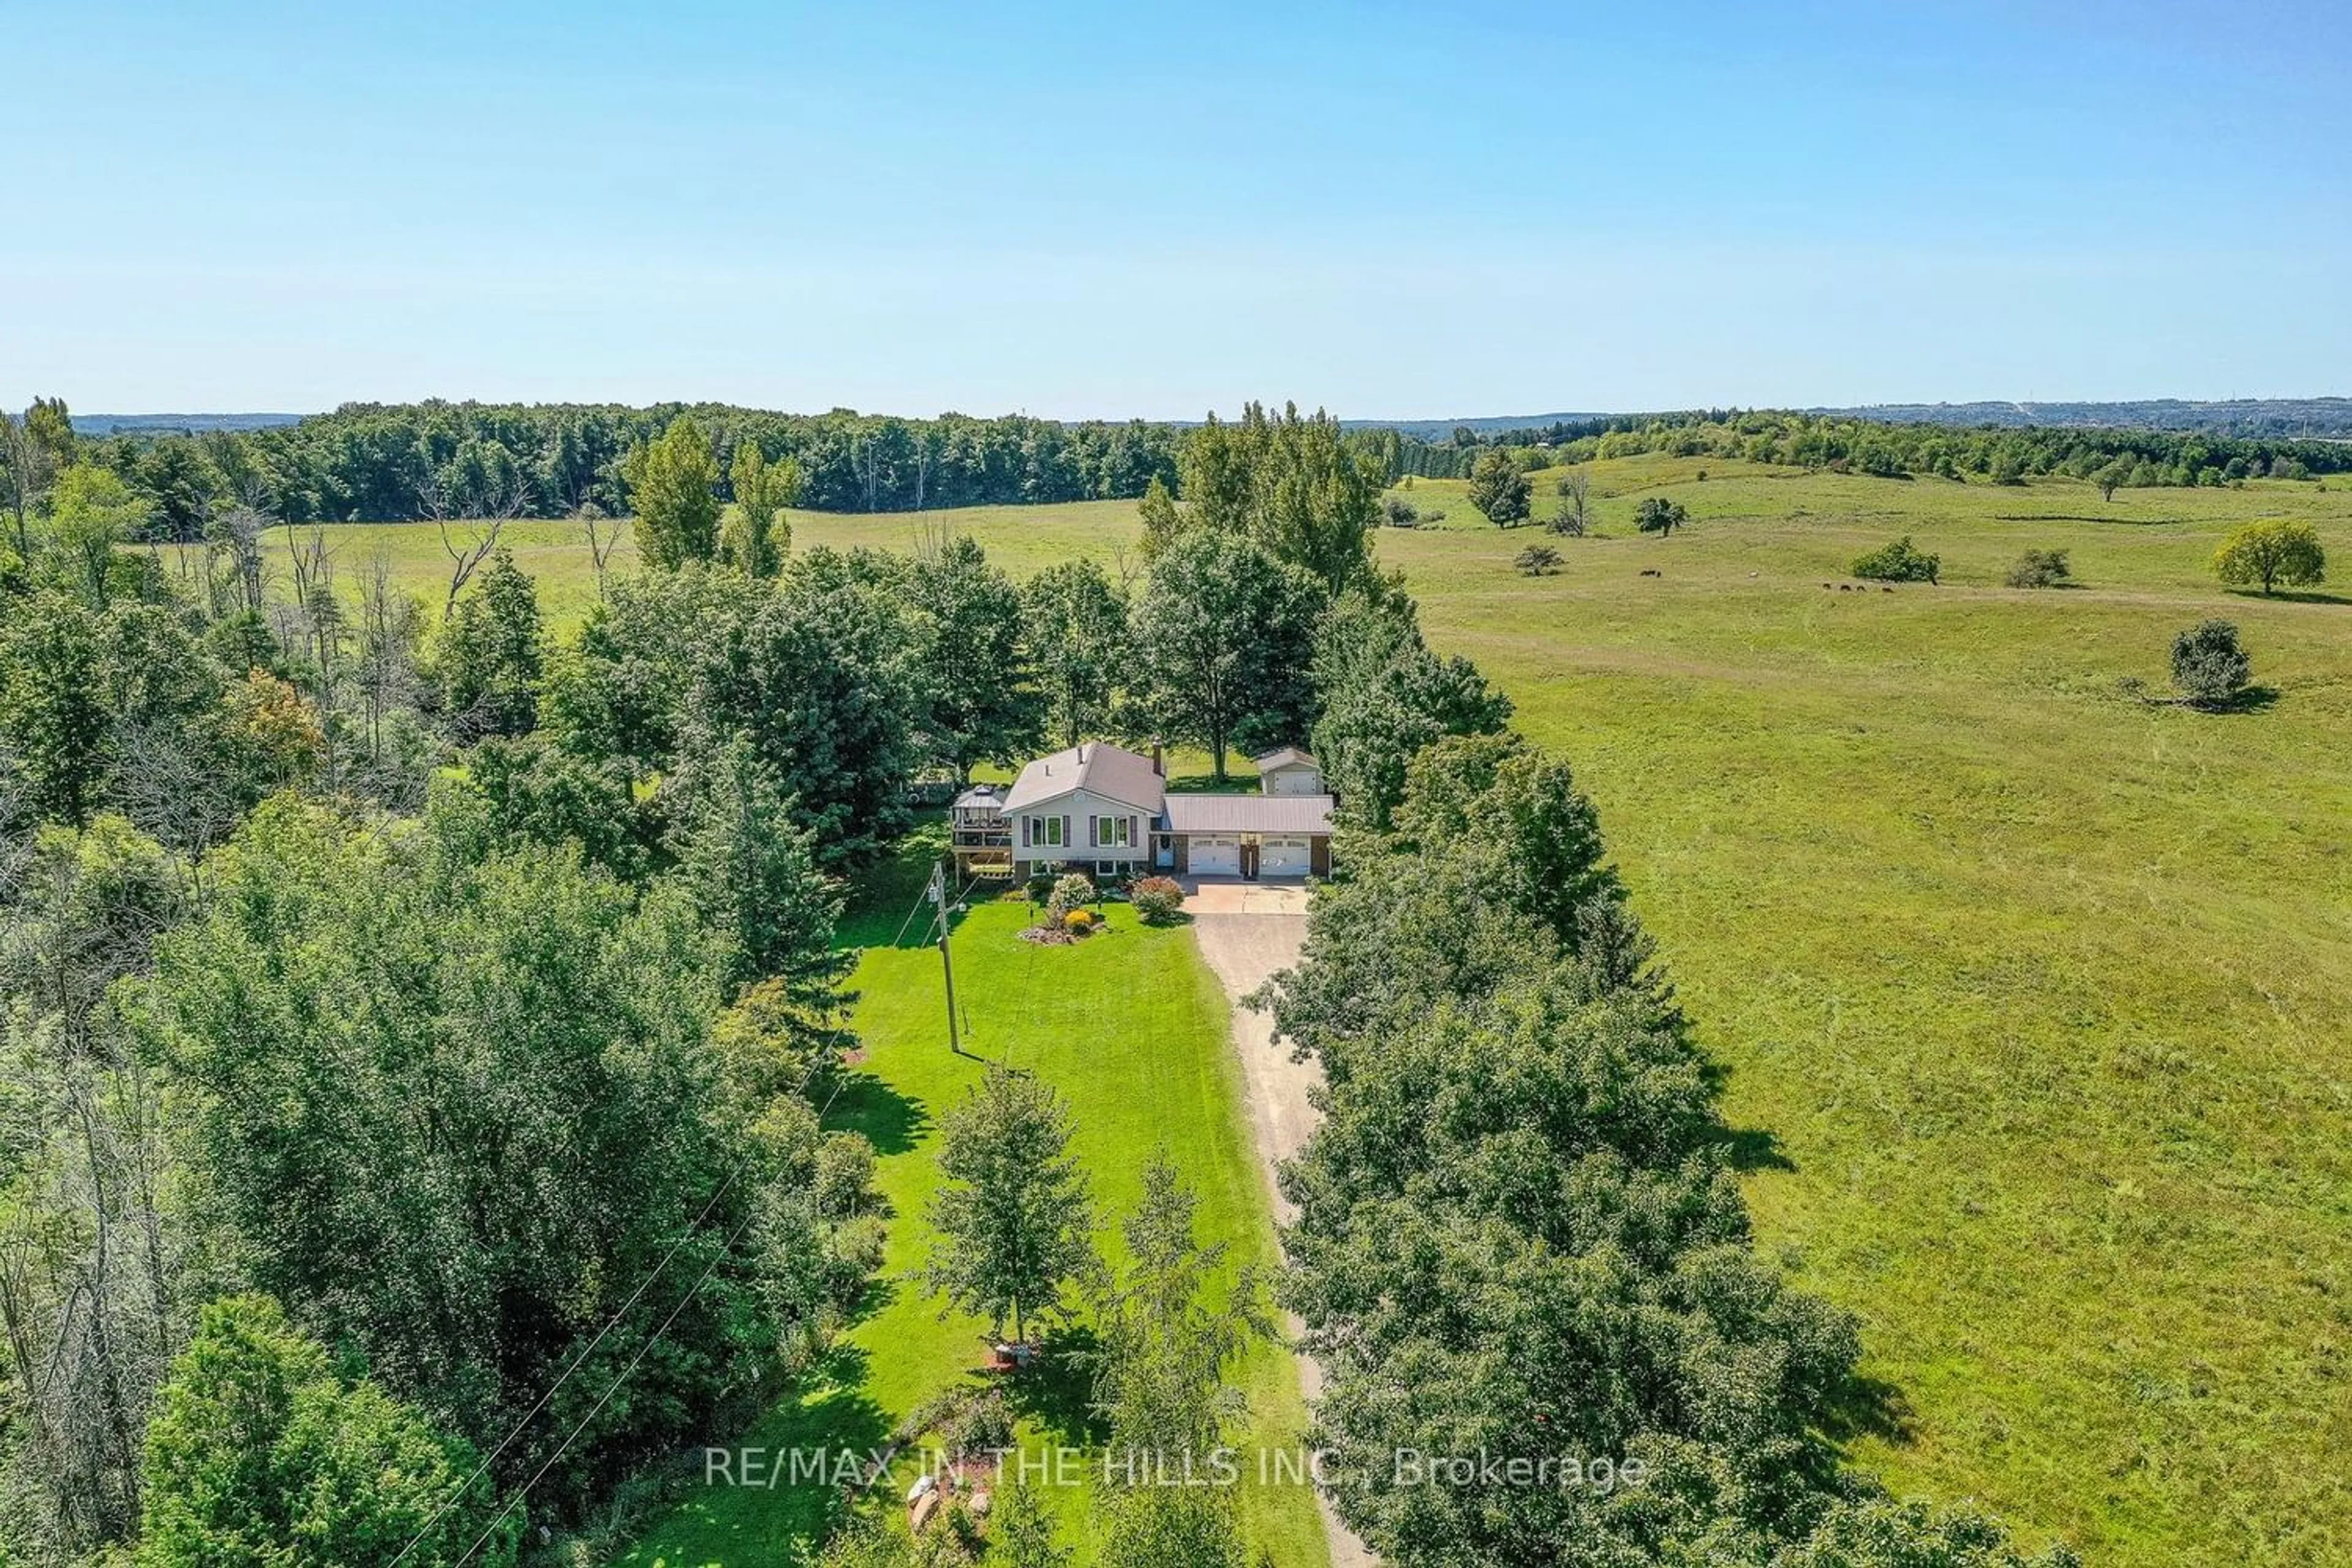 Cottage for 20538 Horseshoe Hill Rd, Caledon Ontario L7K 2B6